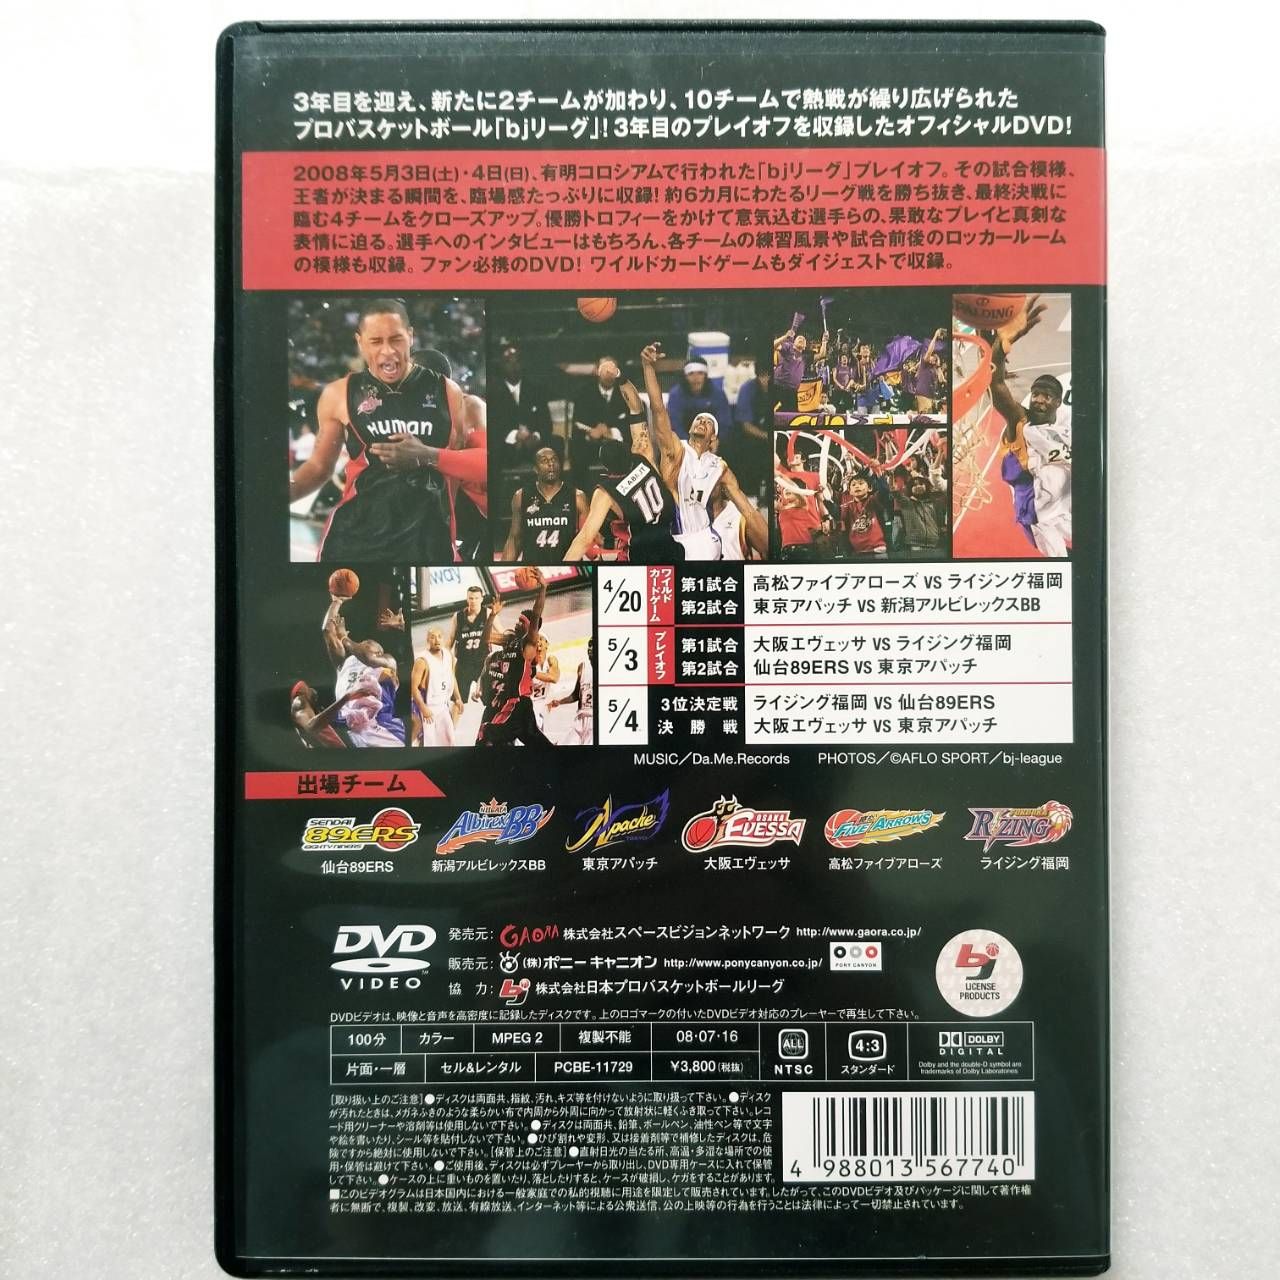 2007-2008 bj-league THE FINALS 中古DVD - スポーツ・フィットネス